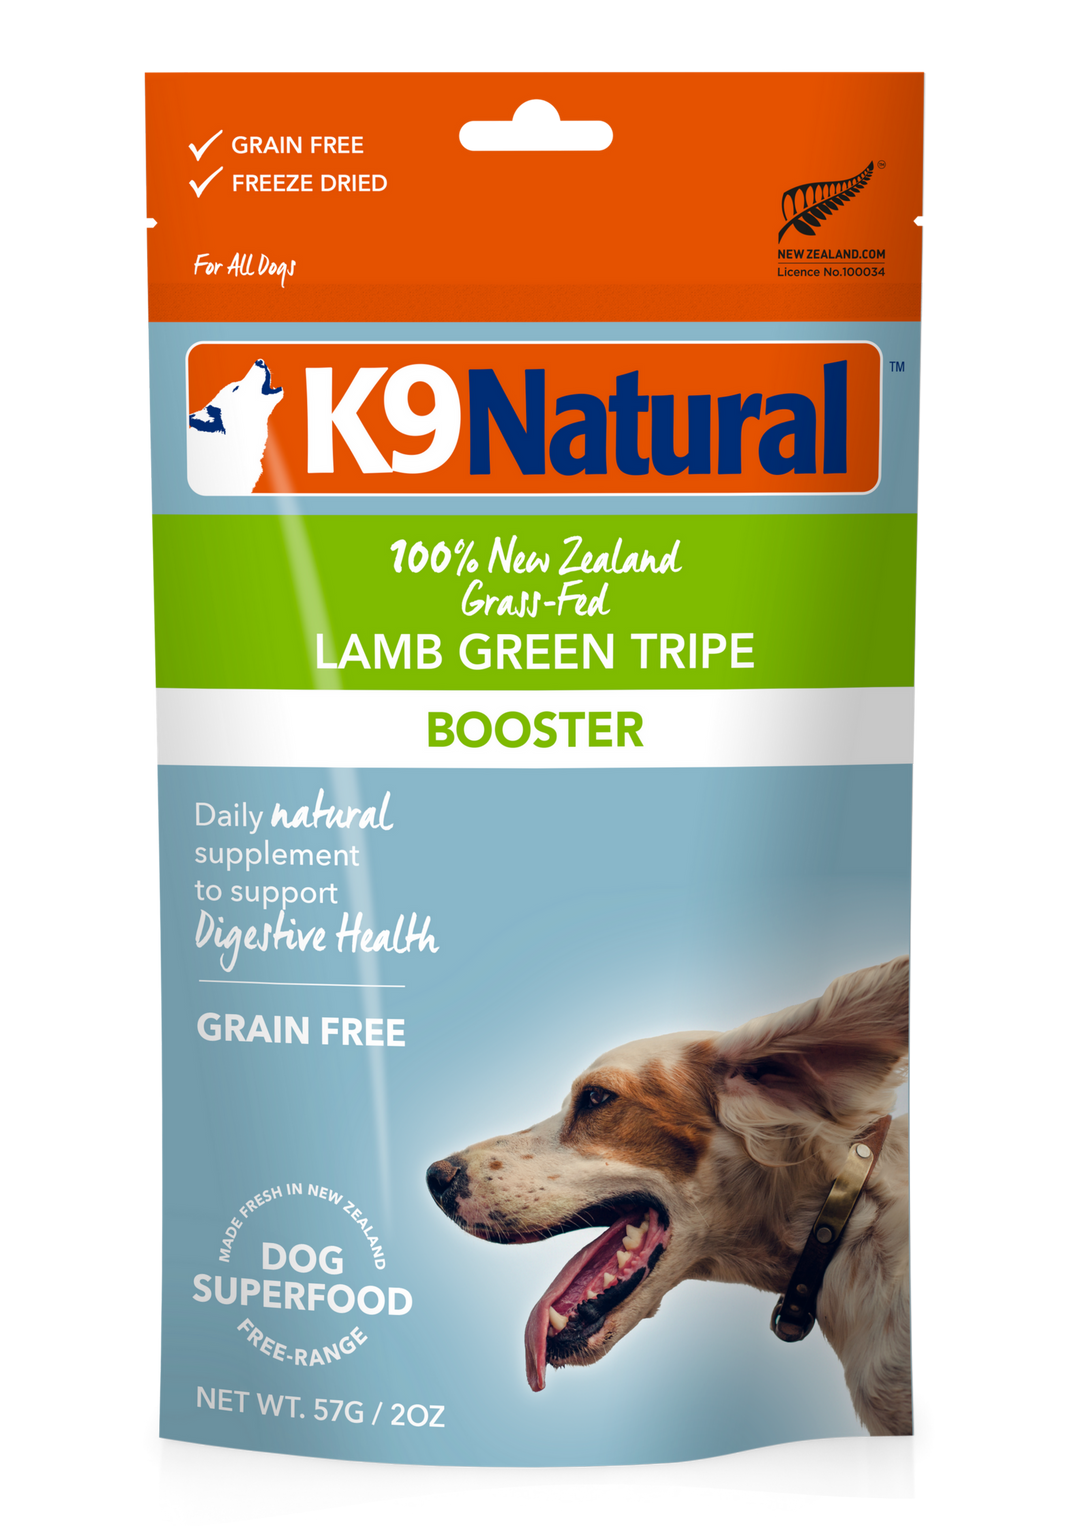 K9 Natural Freeze Dried Lamb Tripe Supplement for Dogs